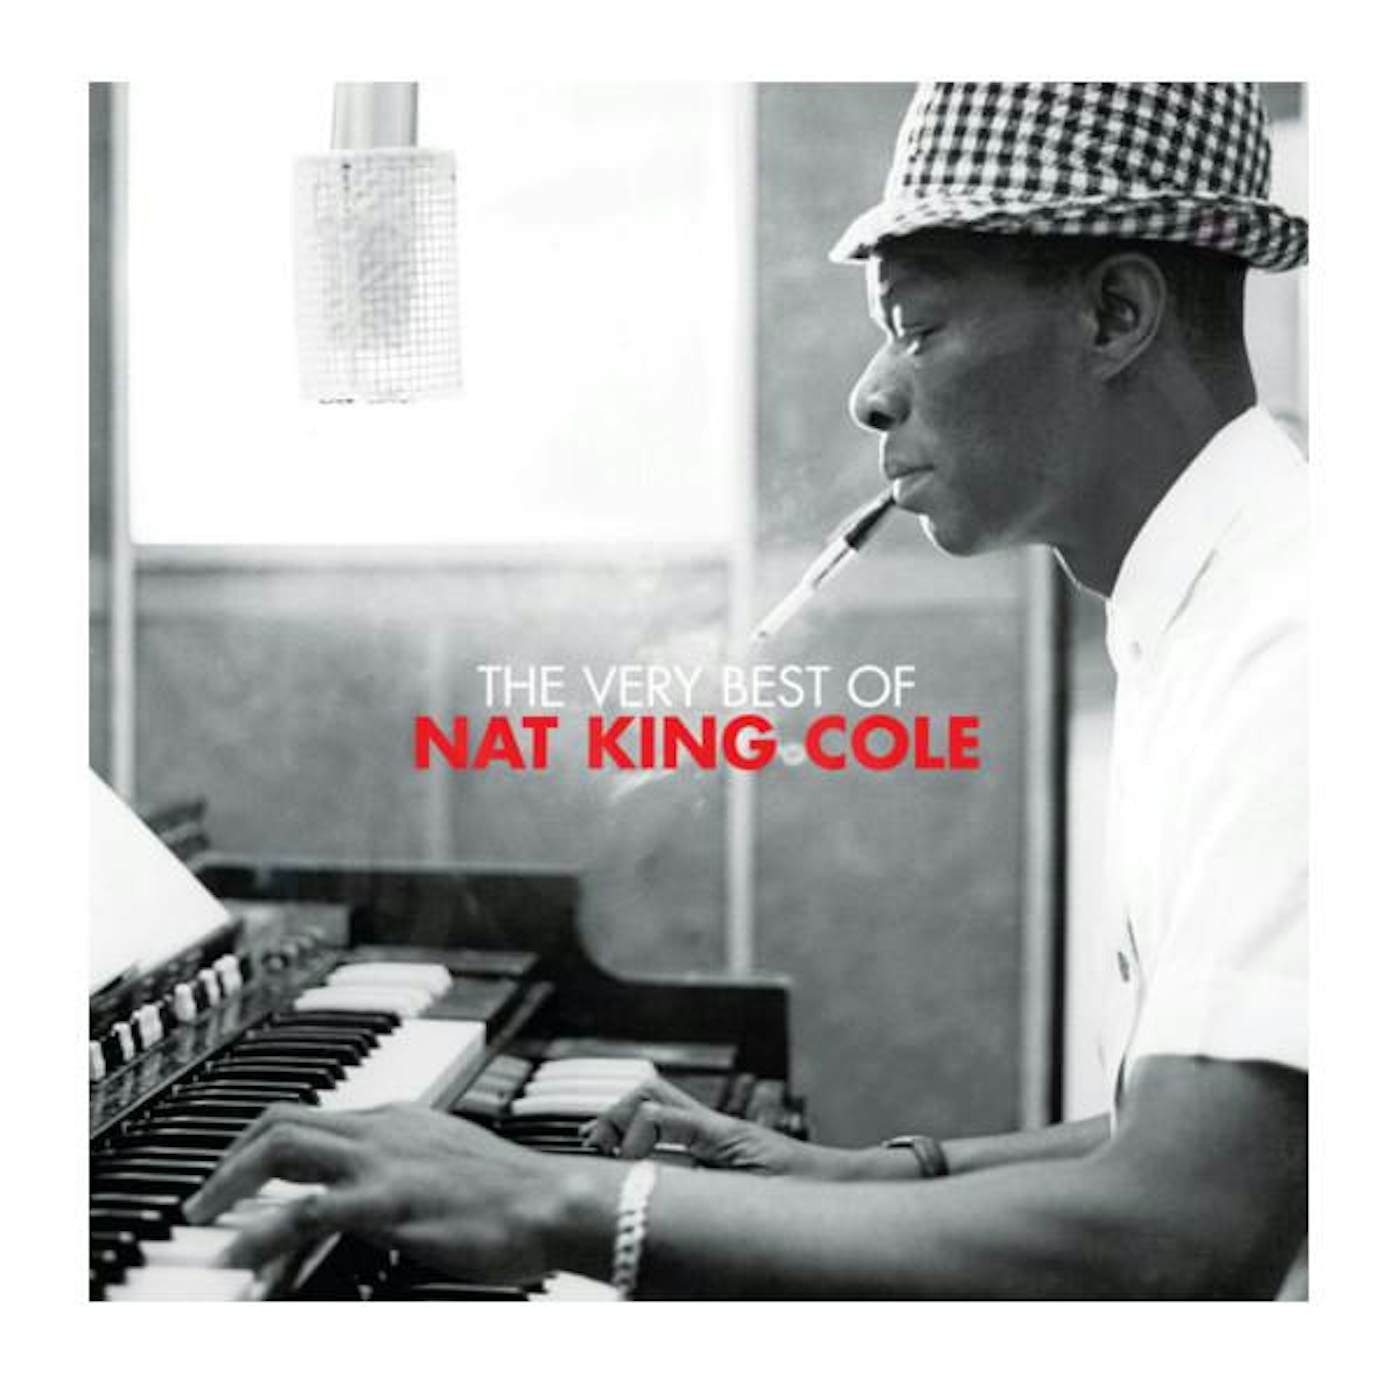 Nat King Cole VERY BEST OF Vinyl Record